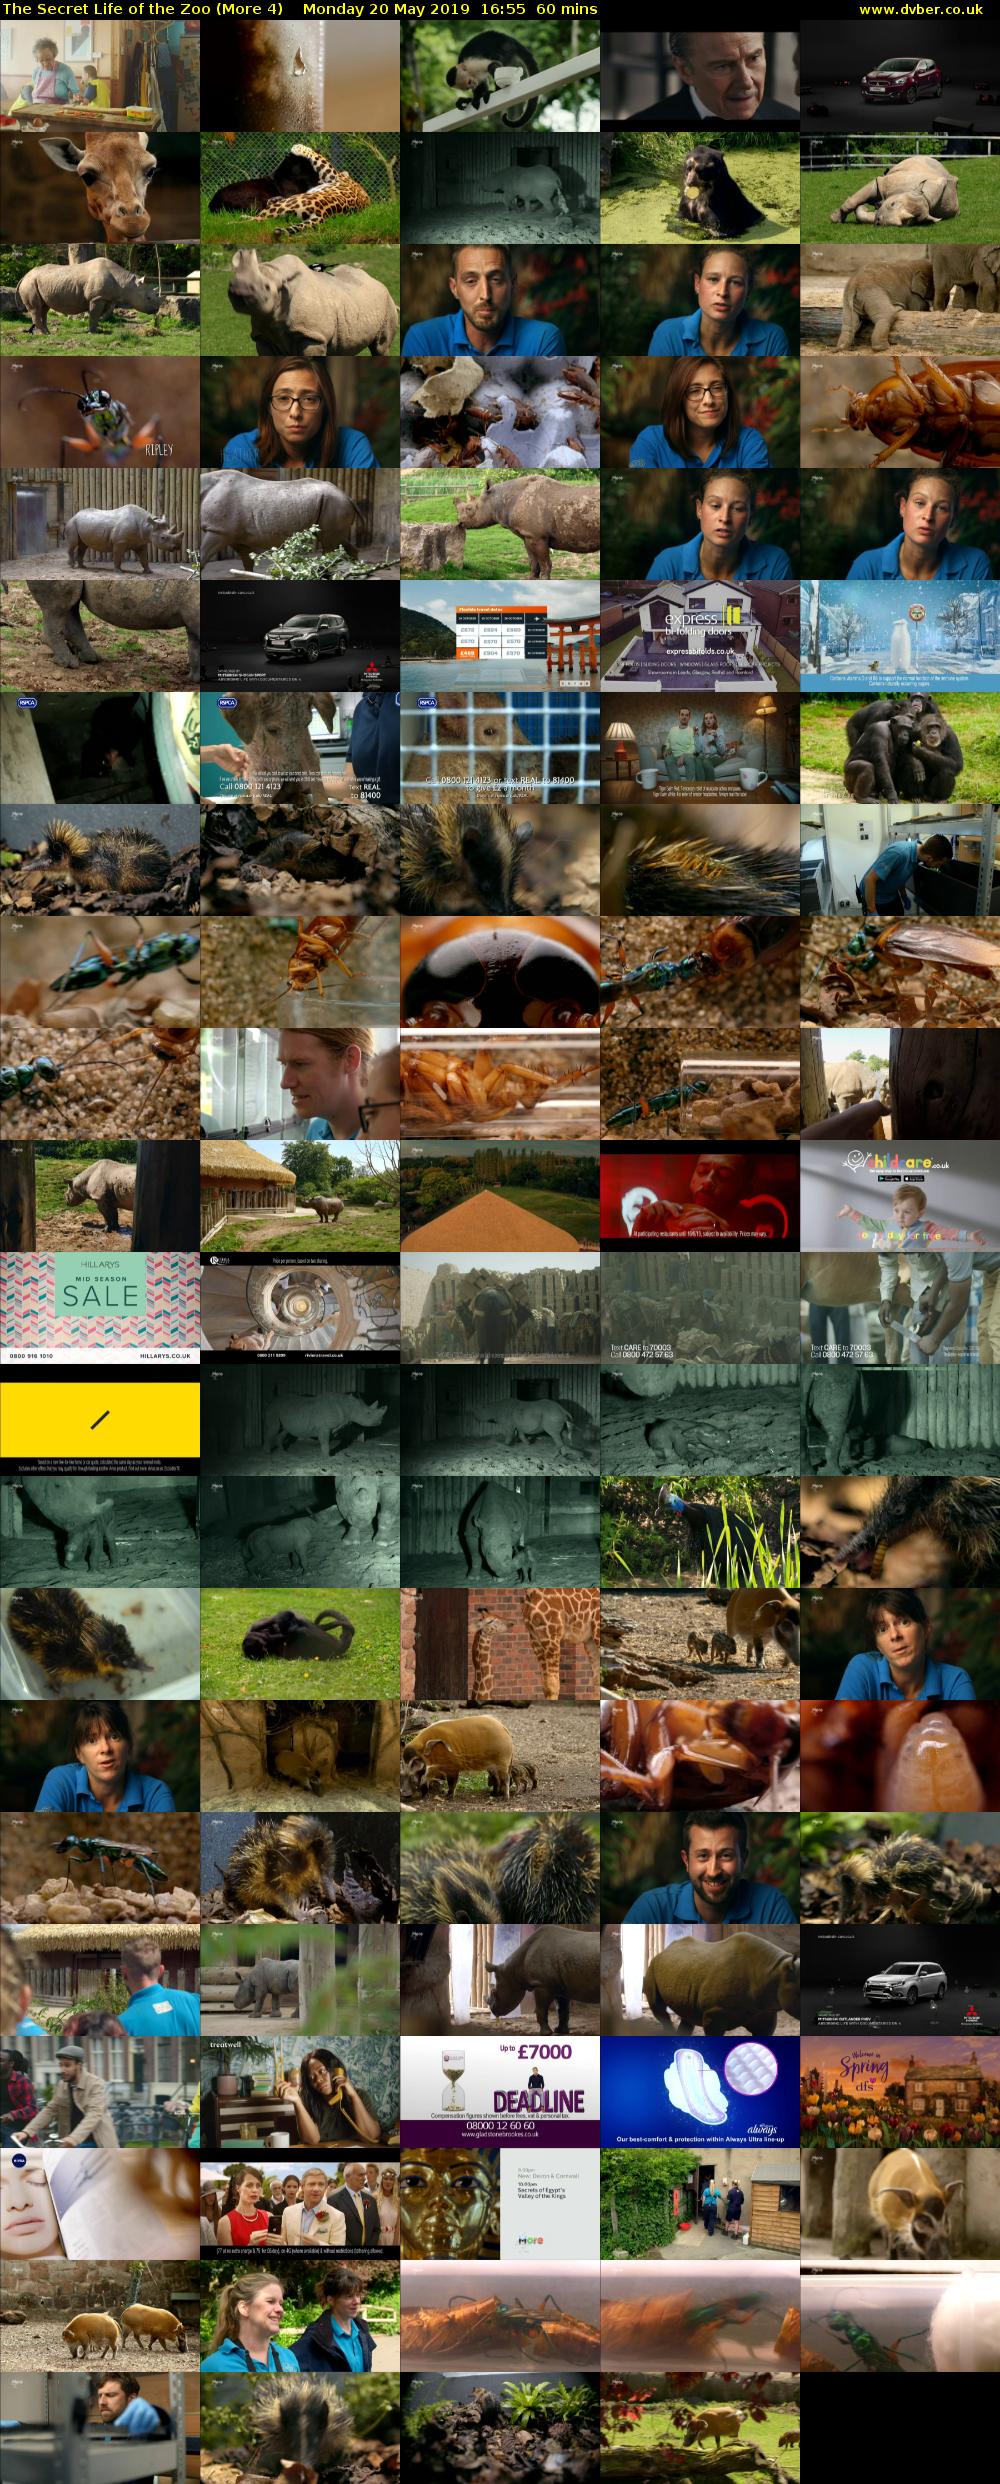 The Secret Life of the Zoo (More 4) Monday 20 May 2019 16:55 - 17:55